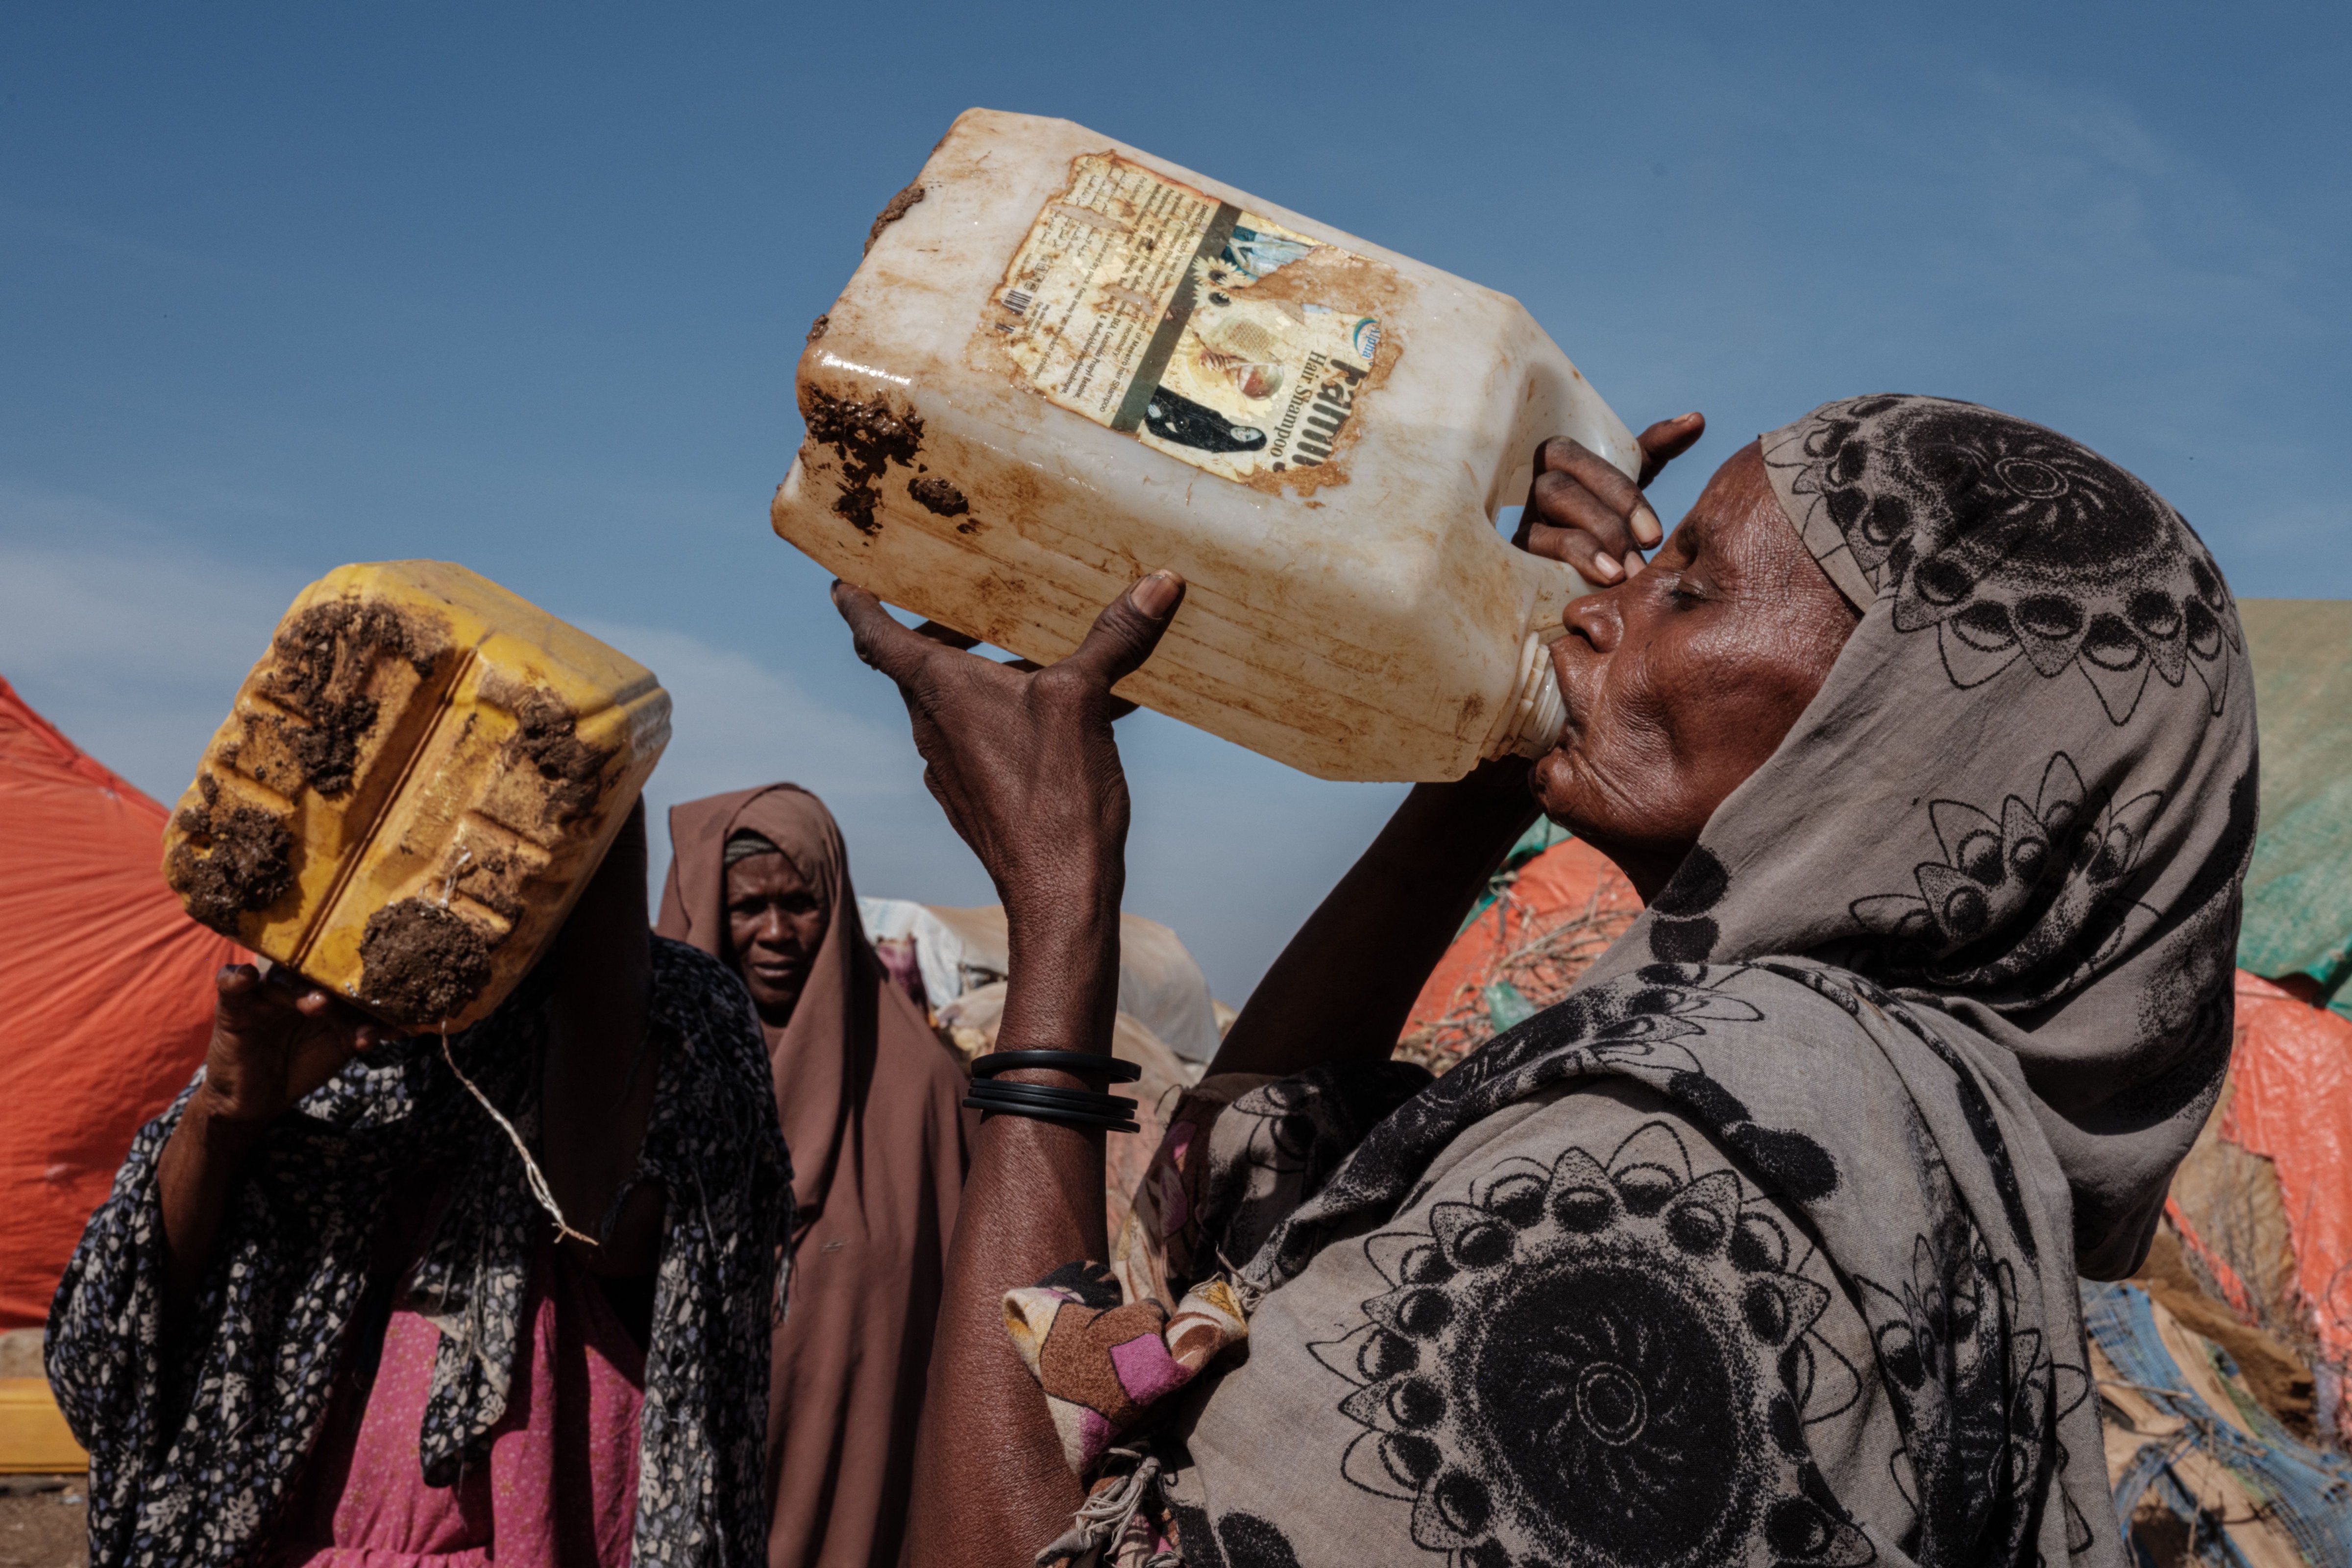 Hawa Mohamed Isack (R), 60, drinks water at a water distribution point at Muuri camp, one of the 500 camps for internally displaced persons in town, in Baidoa, Somalia, on February 13, 2022. (YASUYOSHI CHIBA—AFP/Getty Images)